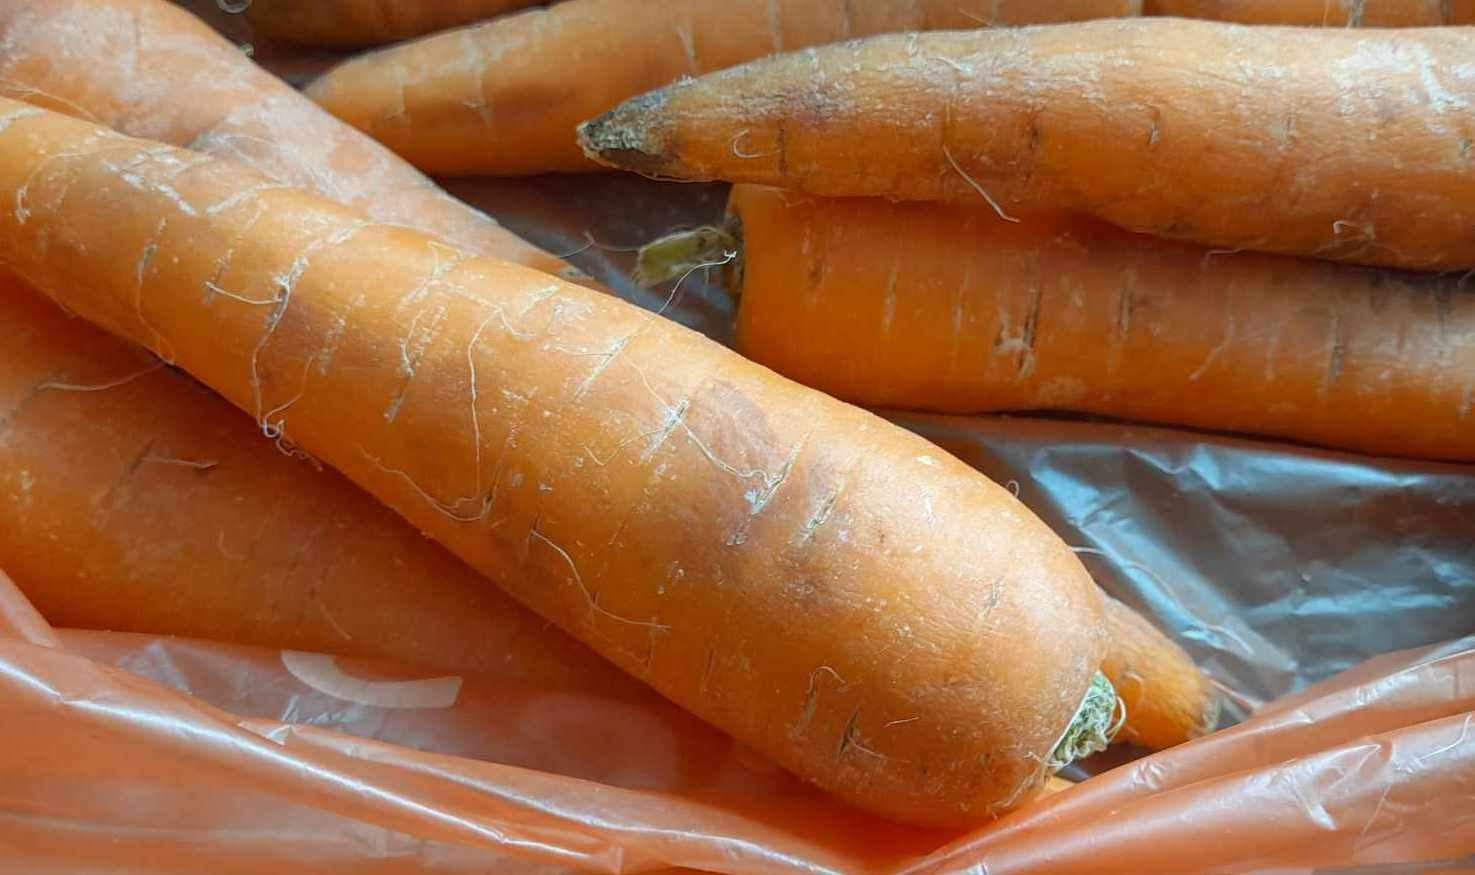 The 49-year-old says she would not even feed these carrots to a dog